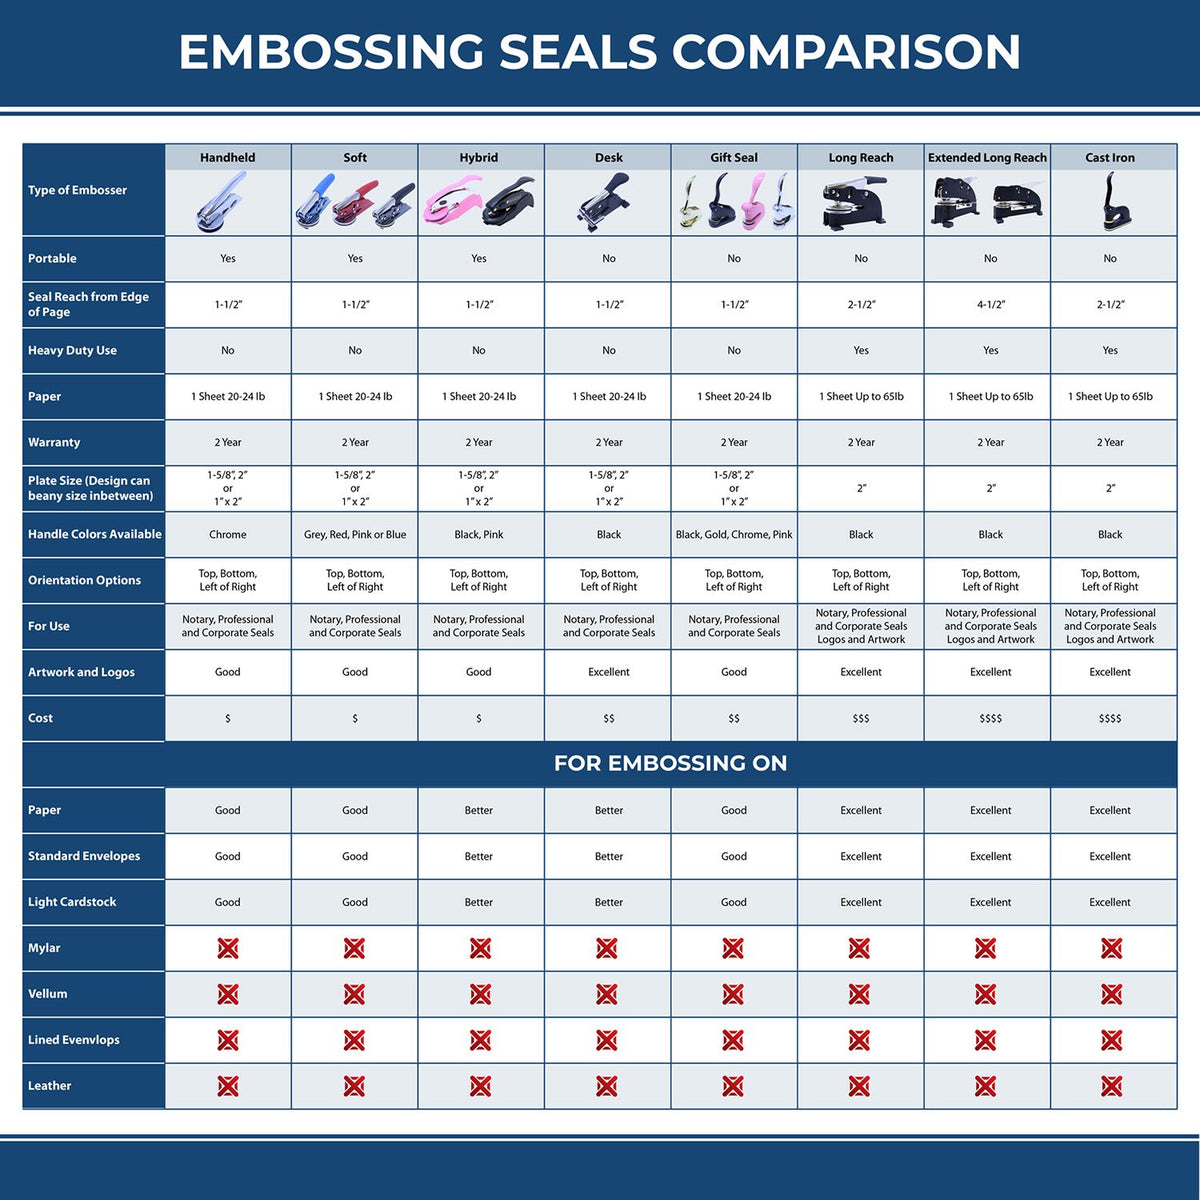 A comparison chart for the different types of mount models available for the Hybrid Massachusetts Engineer Seal